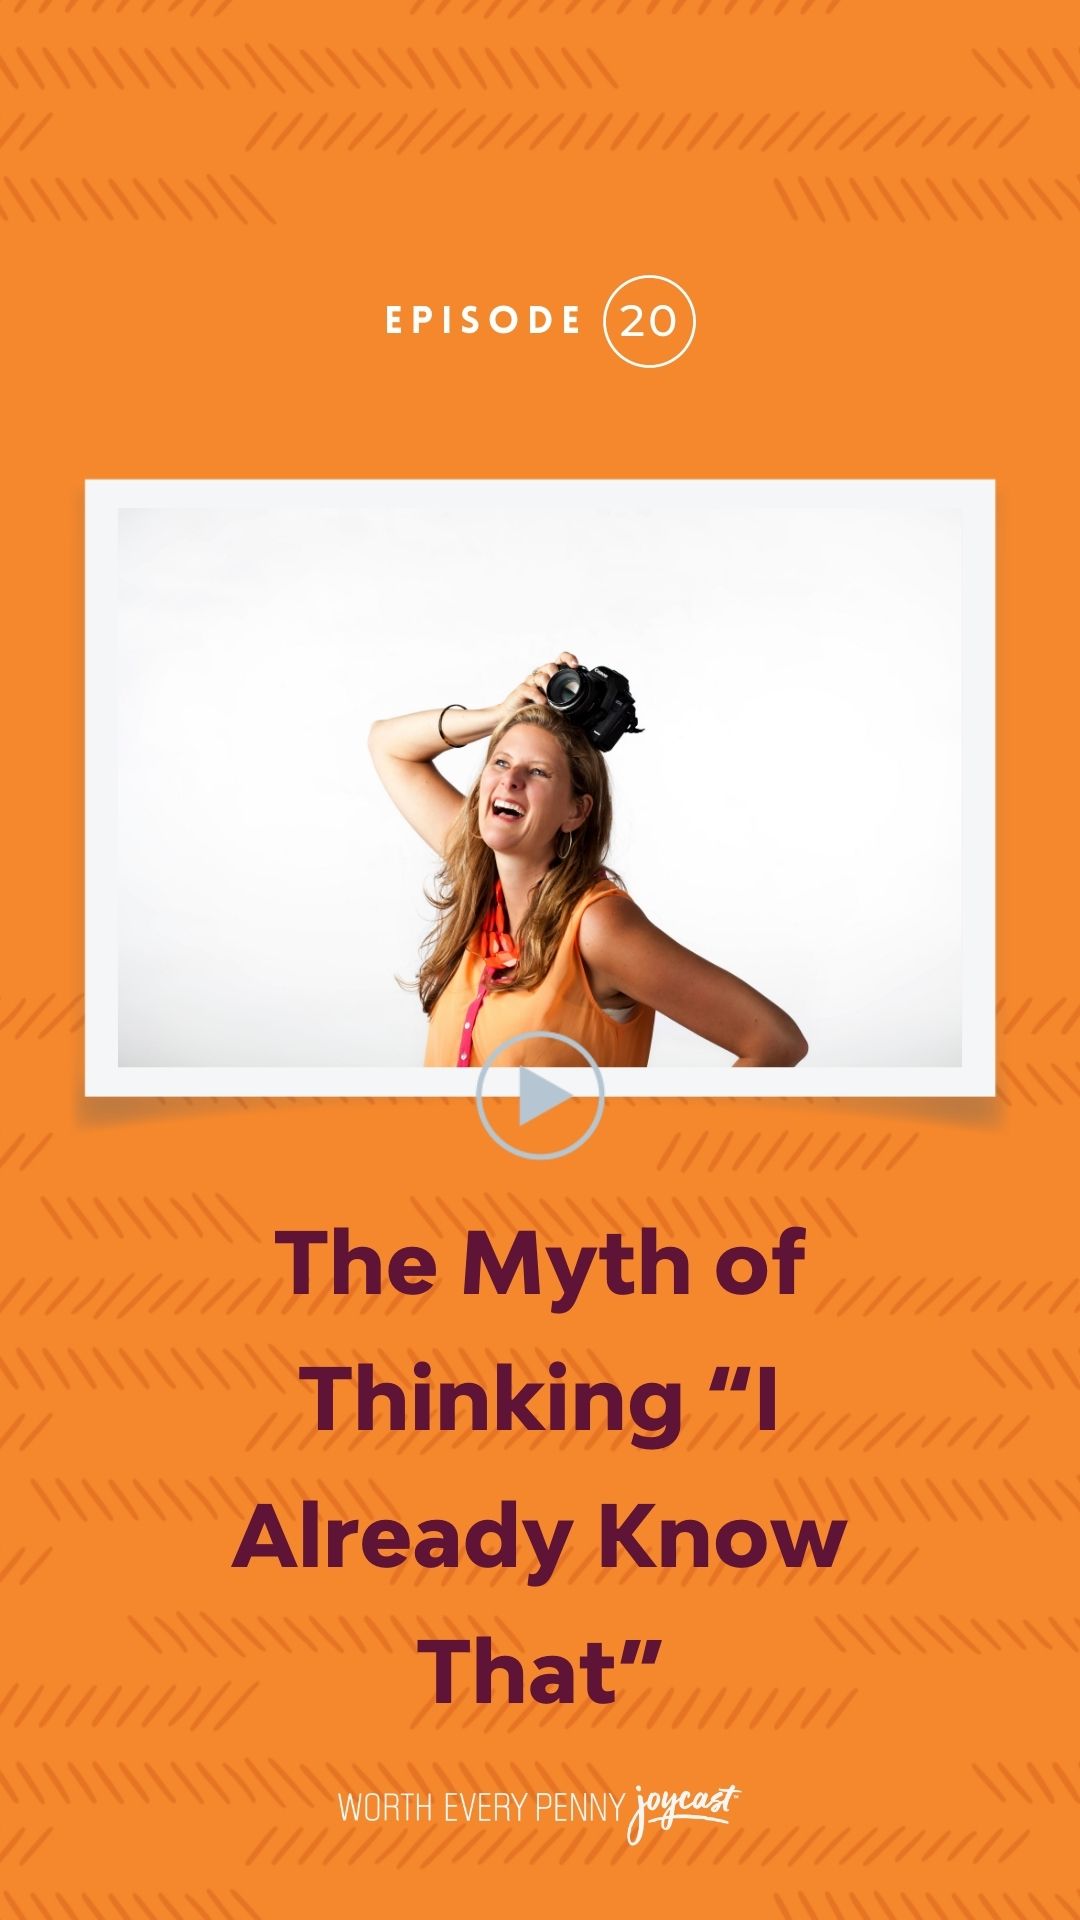 Episode 20: The Myth of Thinking “I Already Know That”